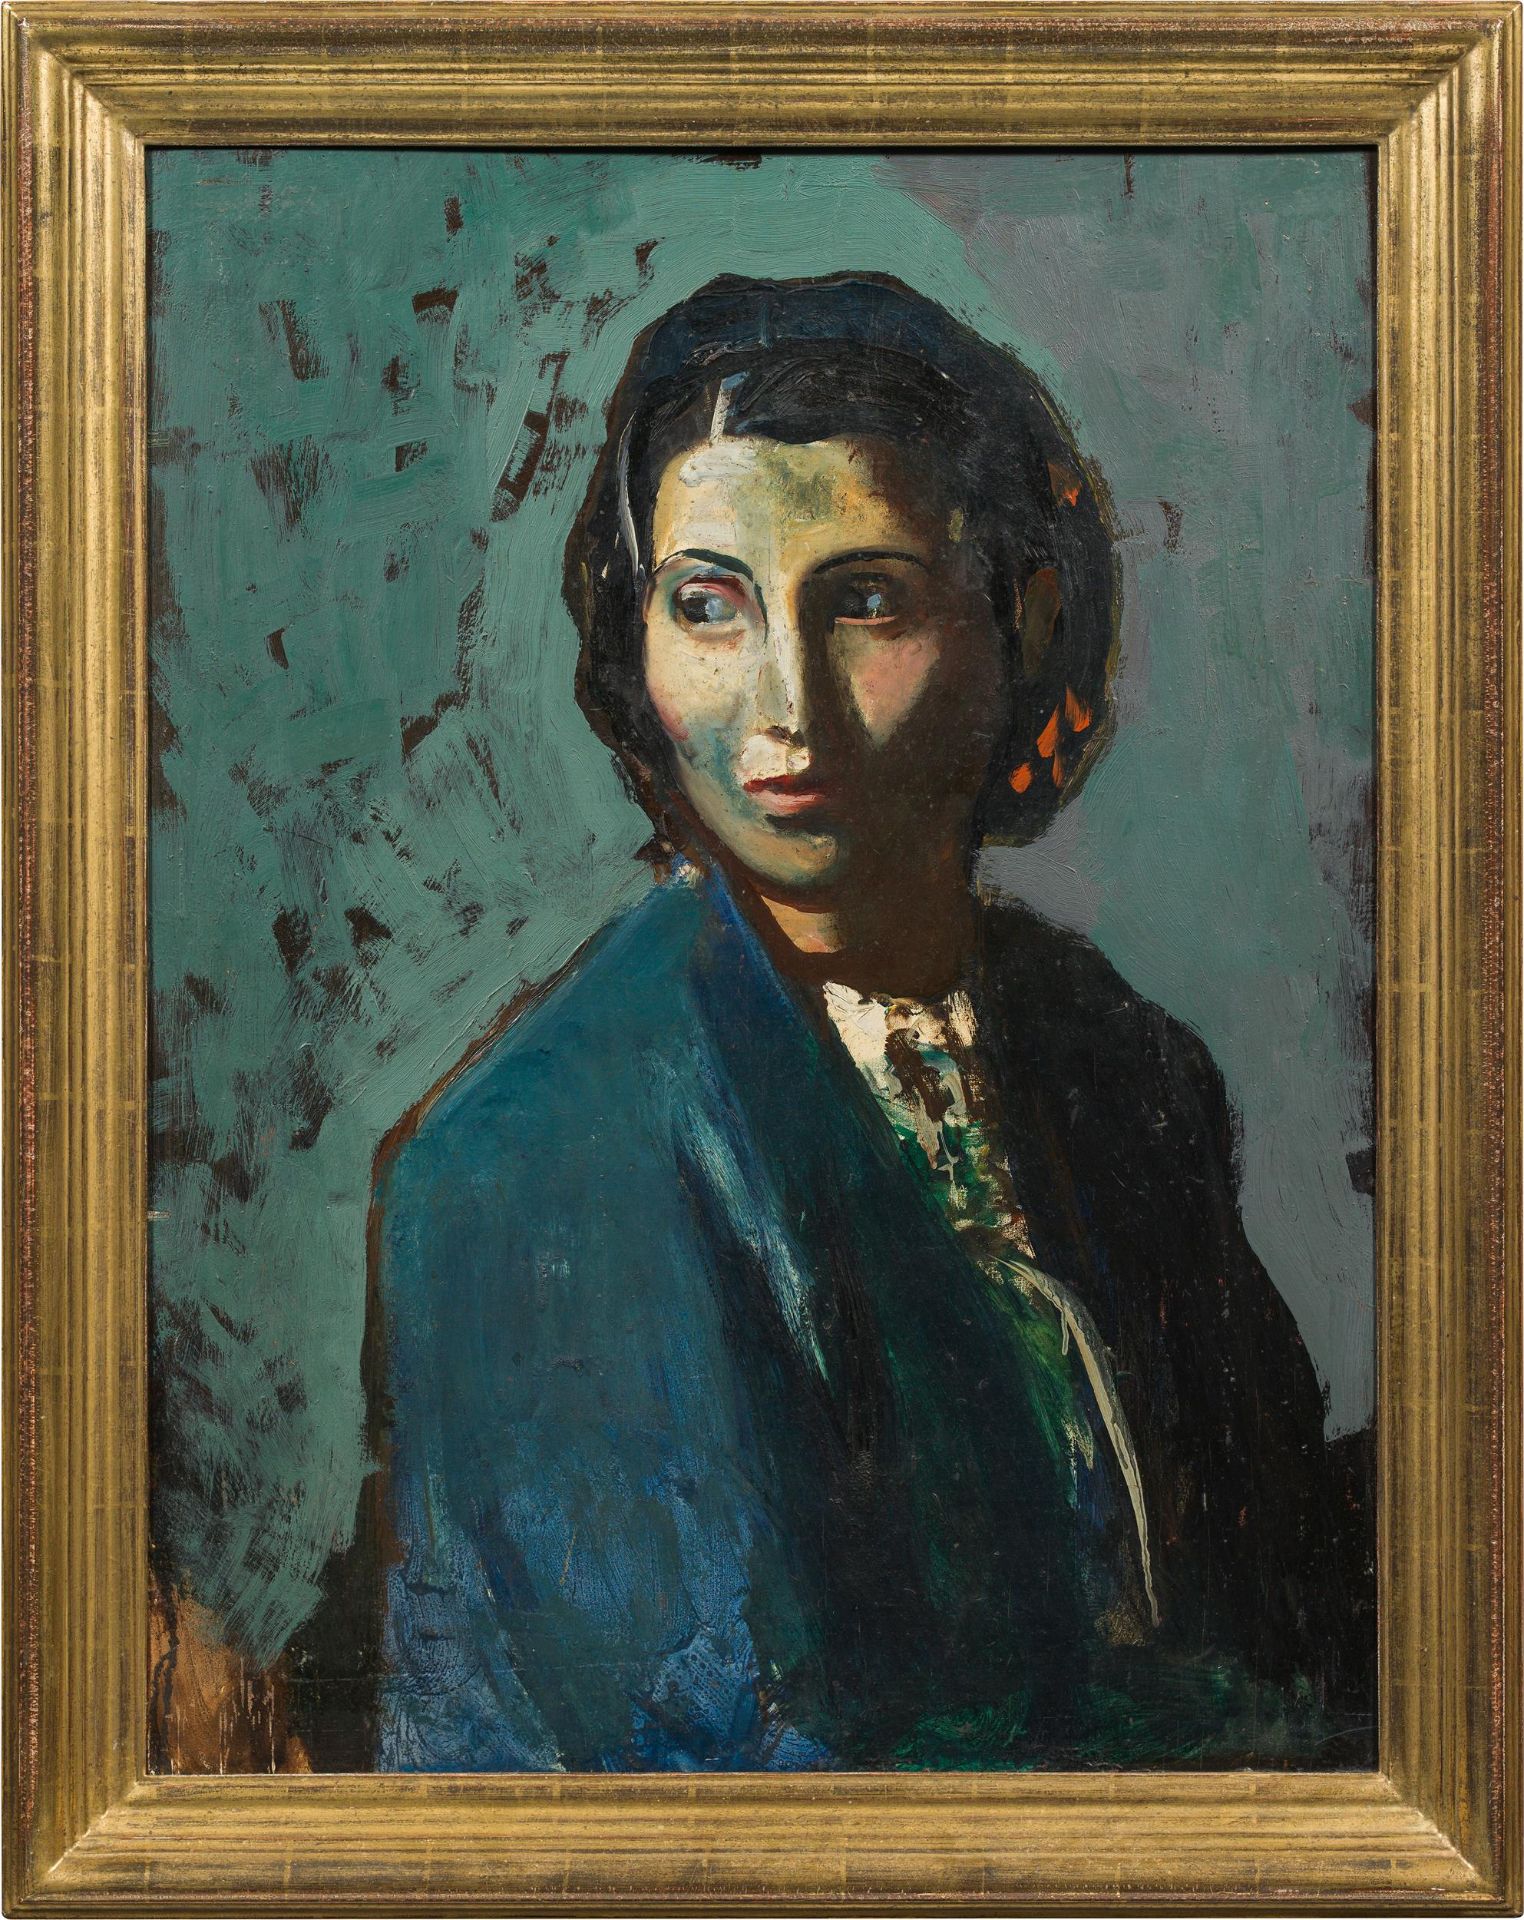 Josef Dobrowsky: Lady with blue coat - Image 3 of 3